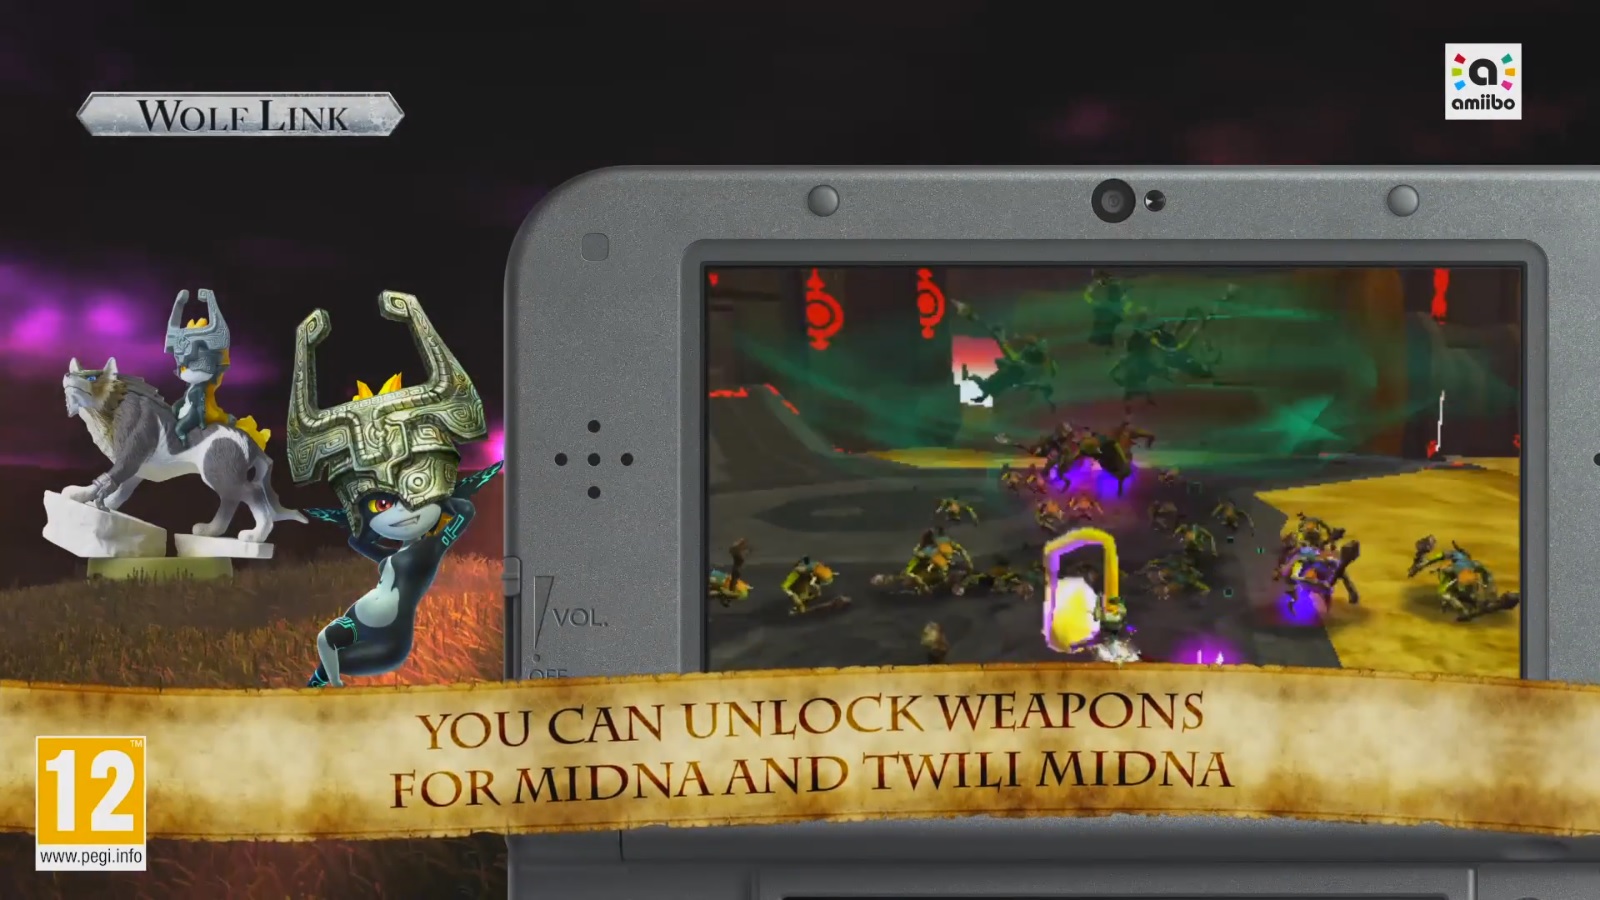 Nintendo of Europe produced a new Hyrule Warriors Legends trailer showing o...